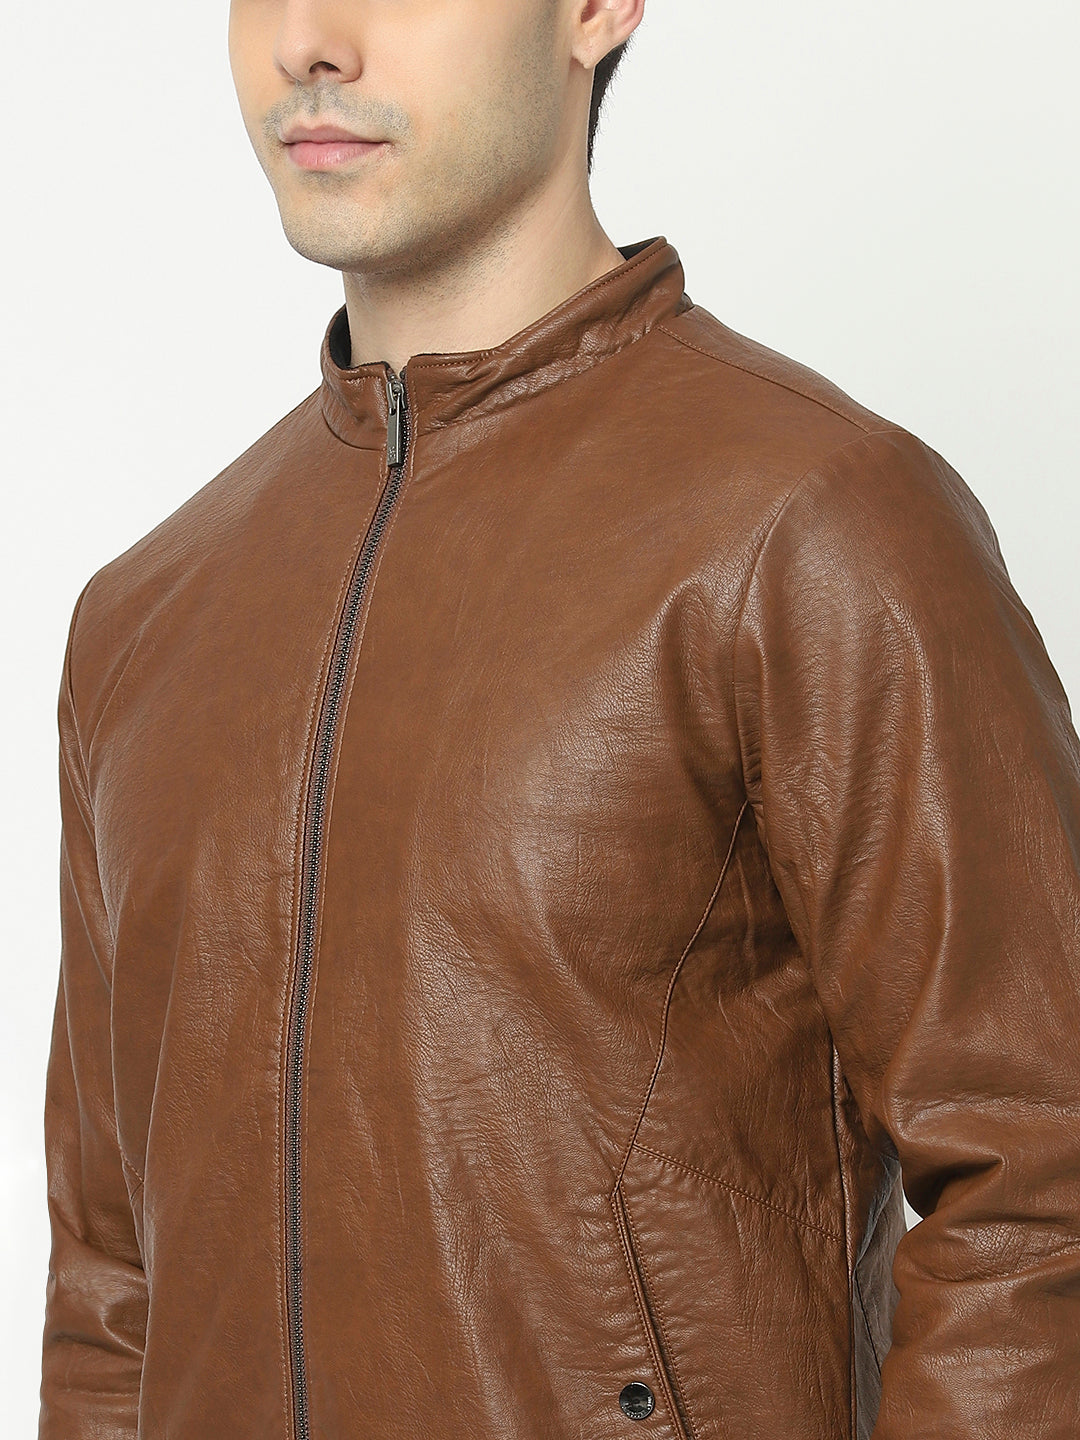  Brown Jacket in Leather